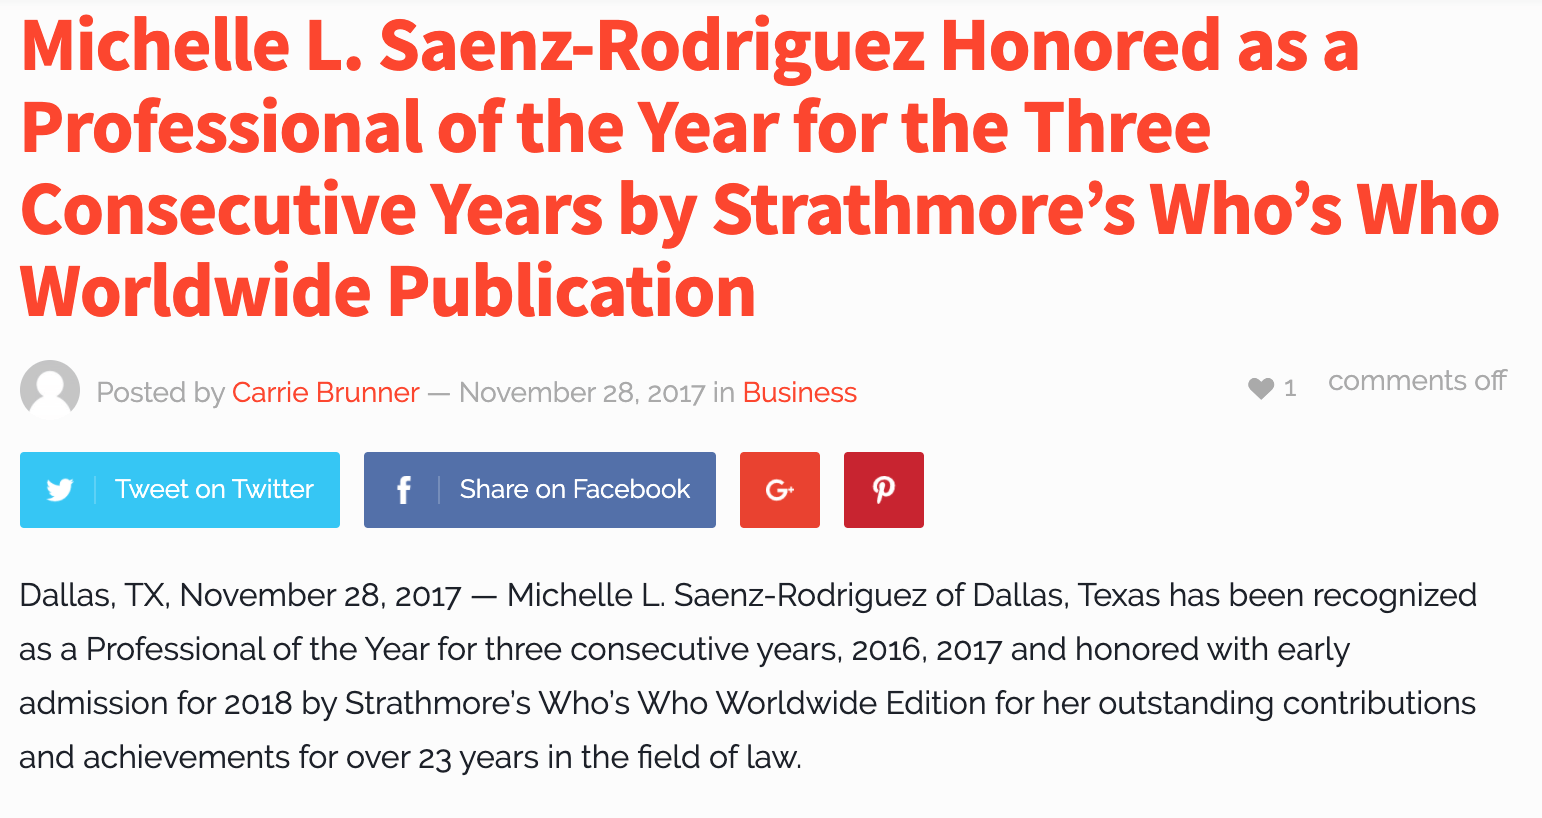 Michelle L. Saenz-Rodriguez Honored as a Professional of the Year for Three Consecutive Years by Strathmore's Who's Who Worldwide Publication